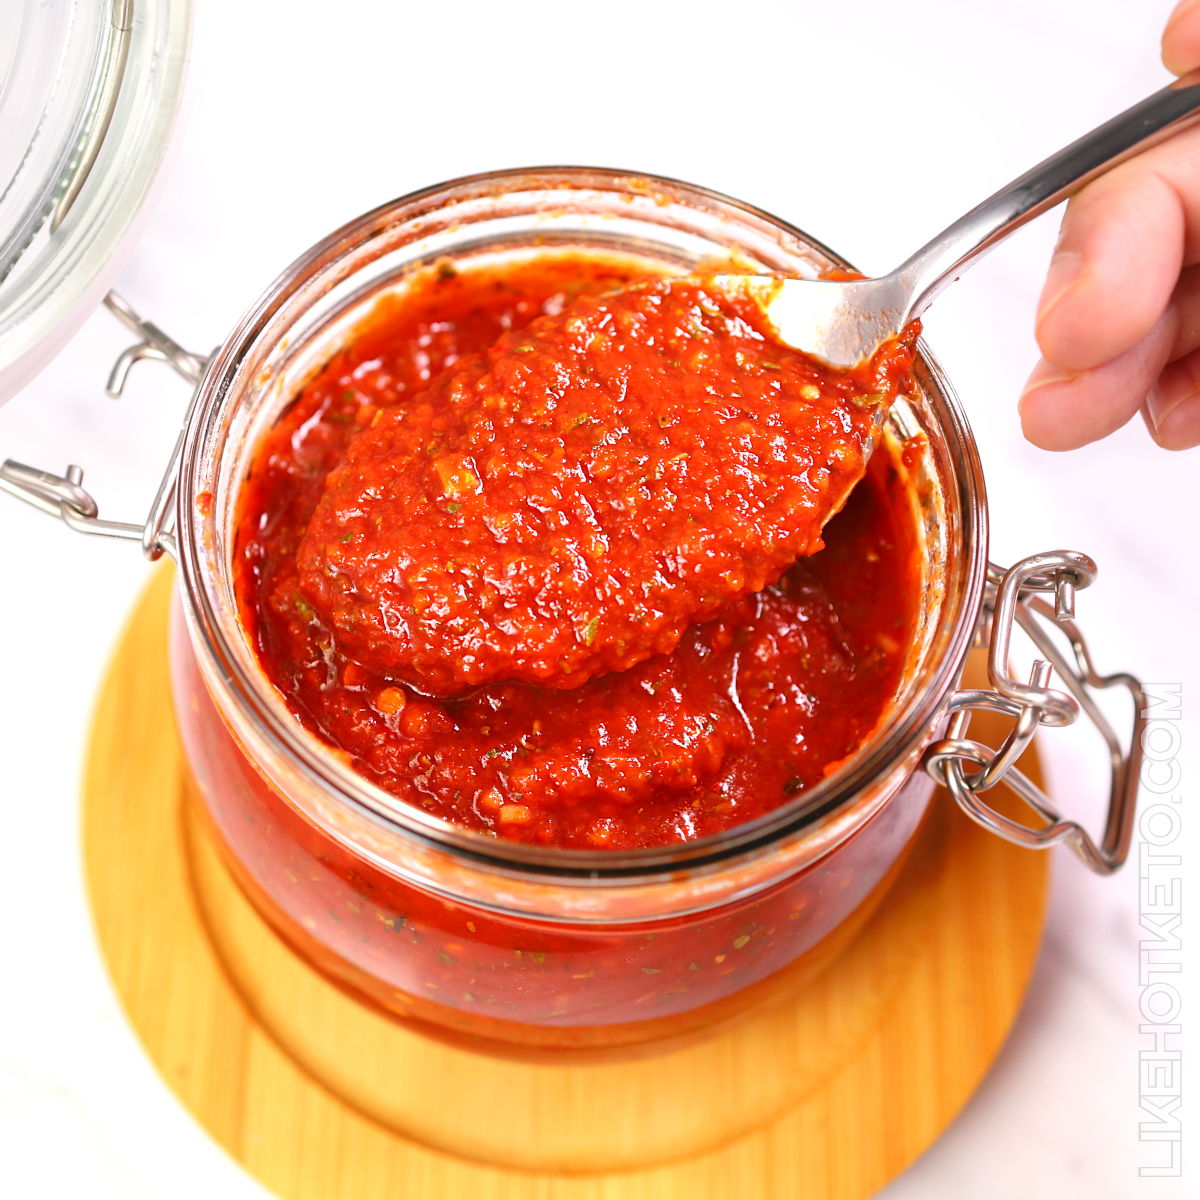 A spoonful of thick tomato sauce textured  with spices and herbs.